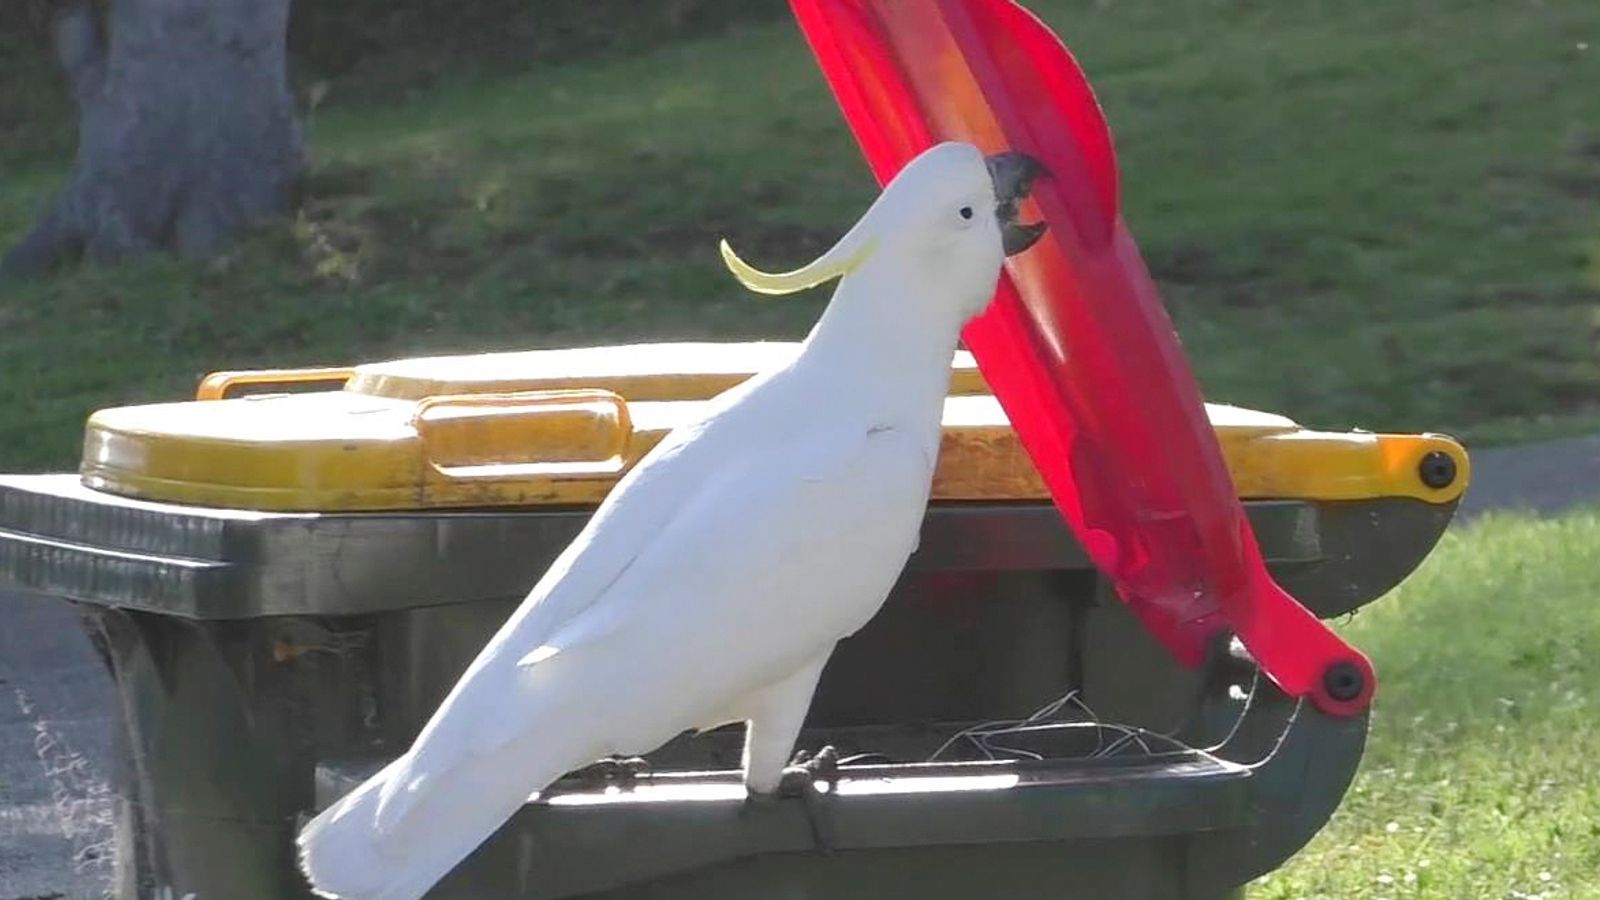 Sydney: Cockatoos work out how to open bin lids by watching others do the trick, researchers say